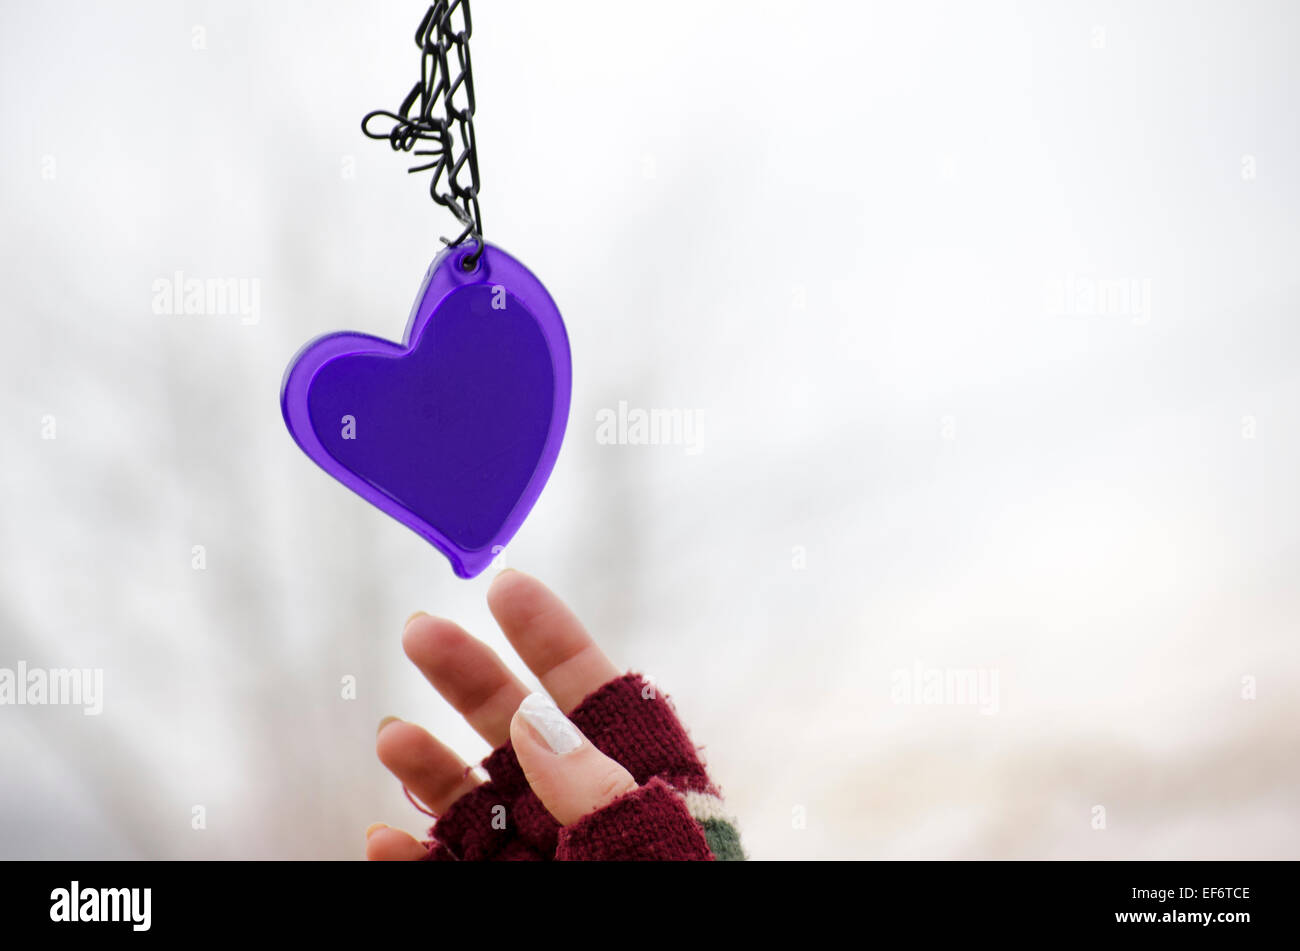 Woman hands in mittens reaching for a purple heart against a white bokeh background Stock Photo